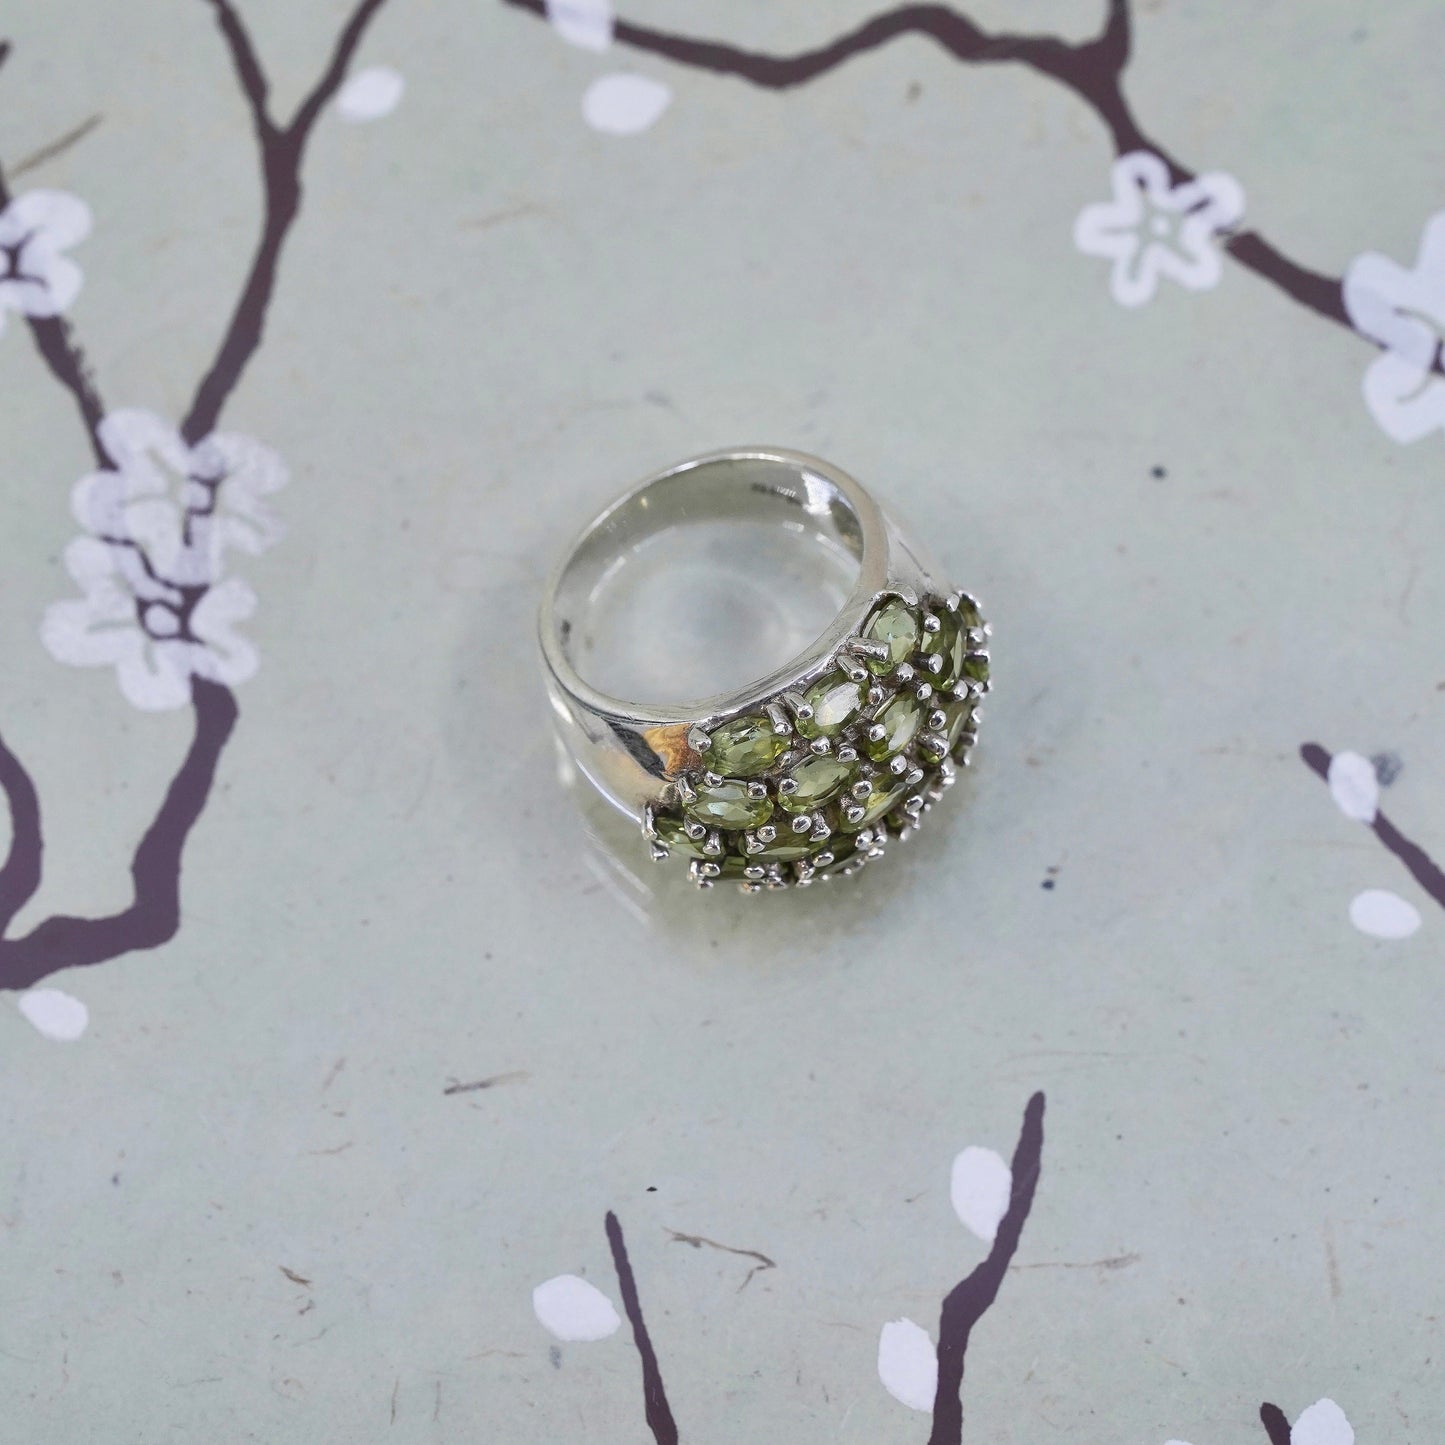 Size 7, vintage Sterling silver handmade ring, 925 band with cluster peridot